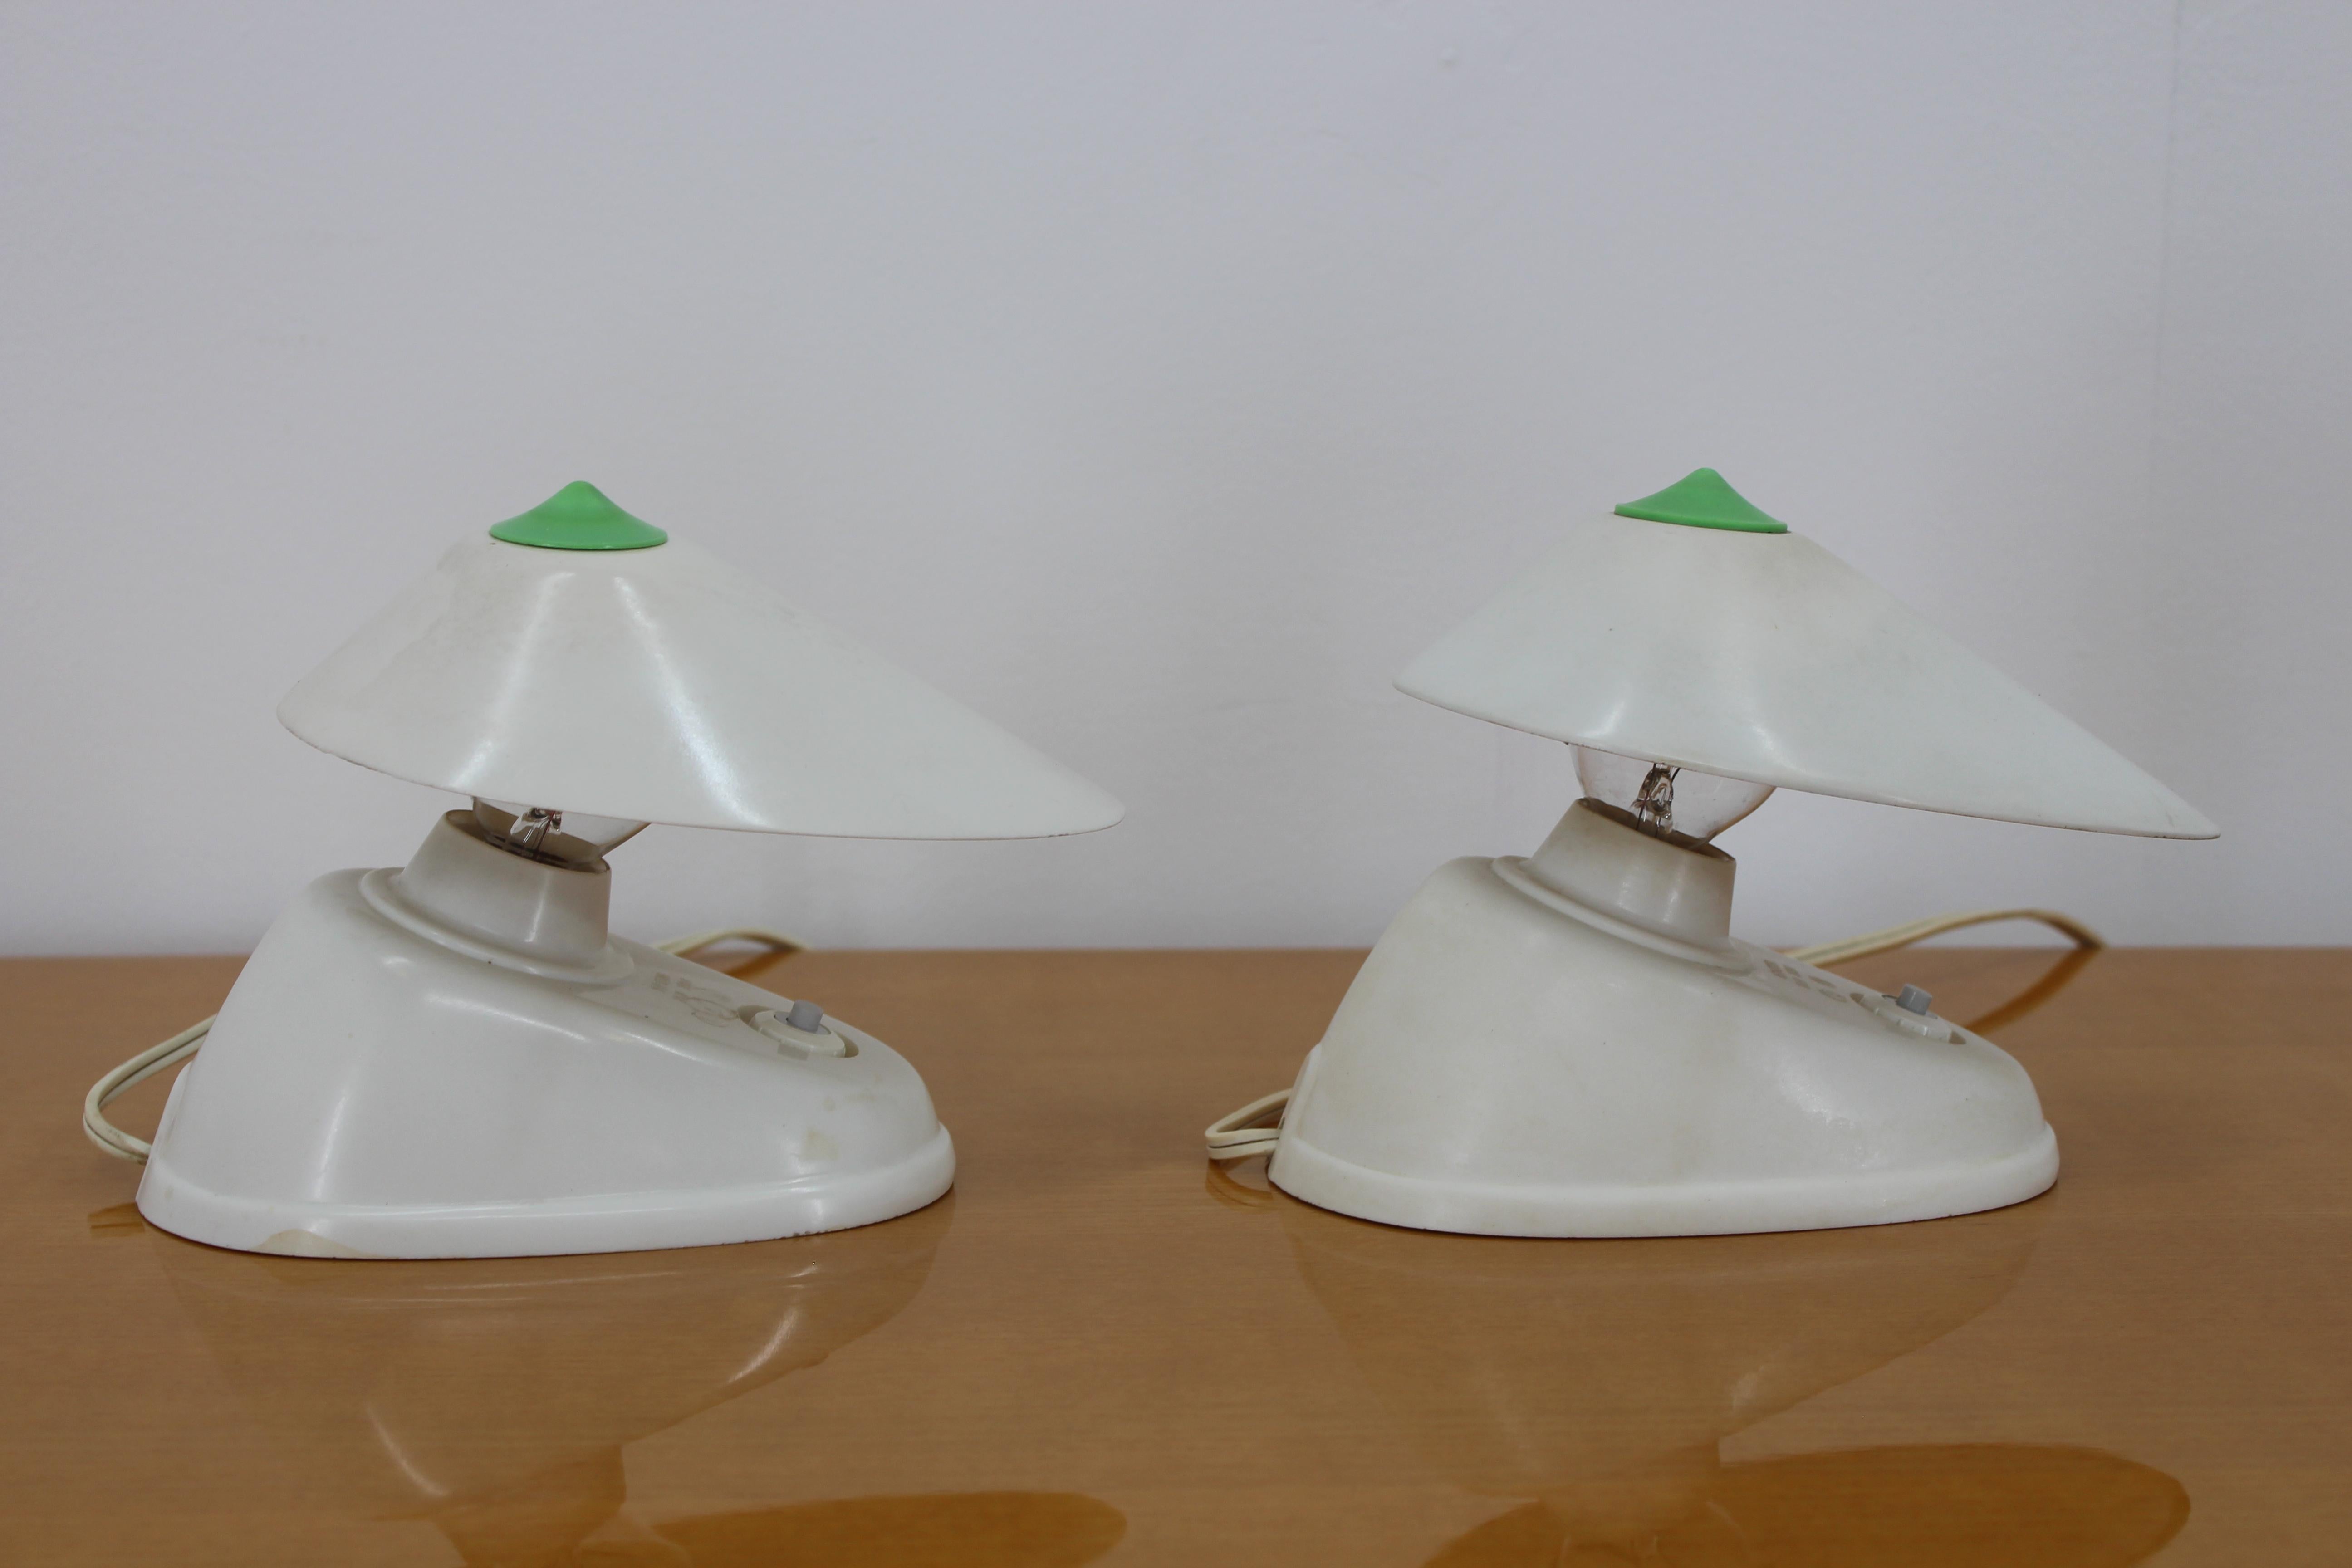 Made in Czechoslovakia
Made of Bakelite
Adjustable lamp shade
Re-polished
Fully functional
Original condition.